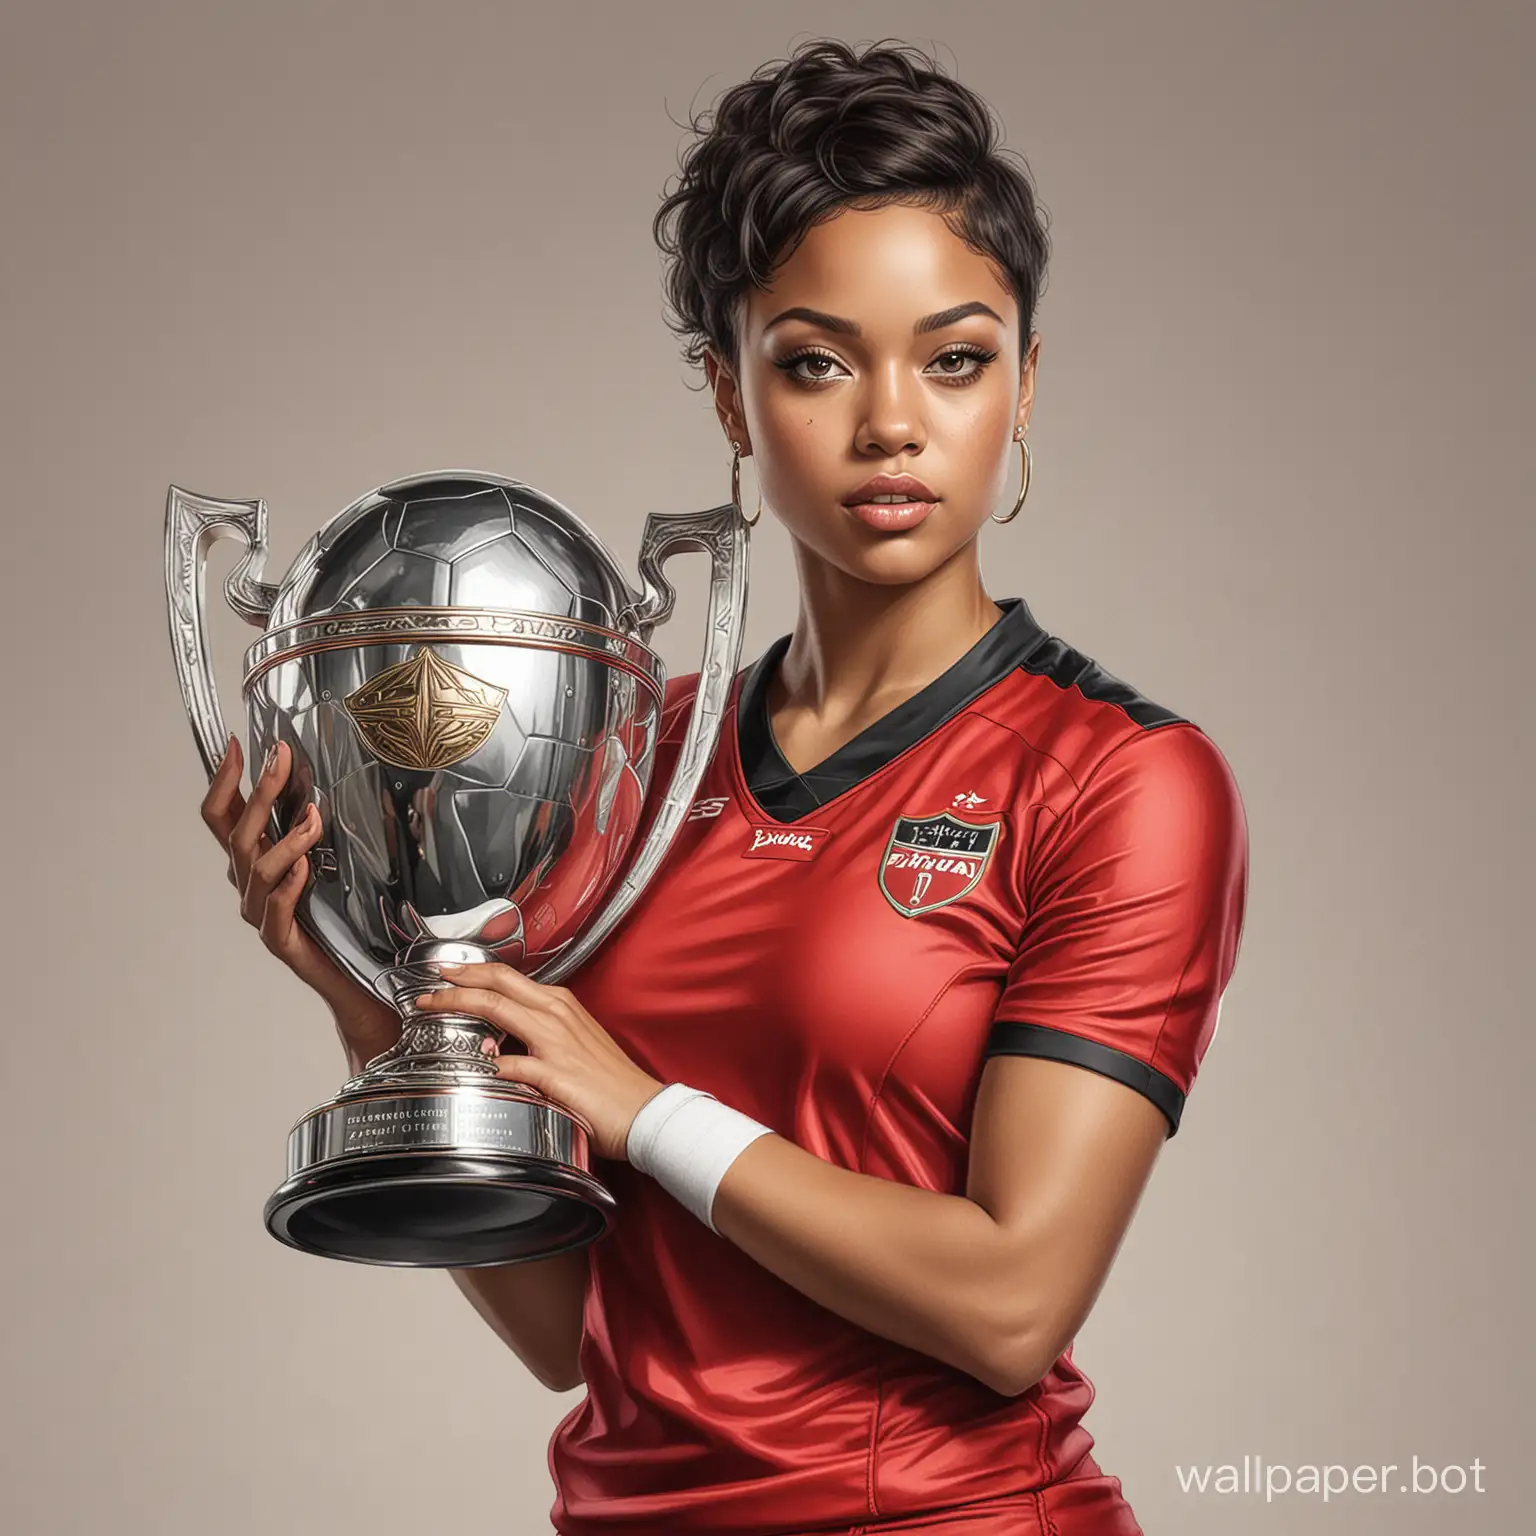 Sketch of a young mulatto woman with dark short hair size 6 breasts narrow waist in red and black football uniform holding a large champions cup on a white background highly realistic drawing of a colored liner